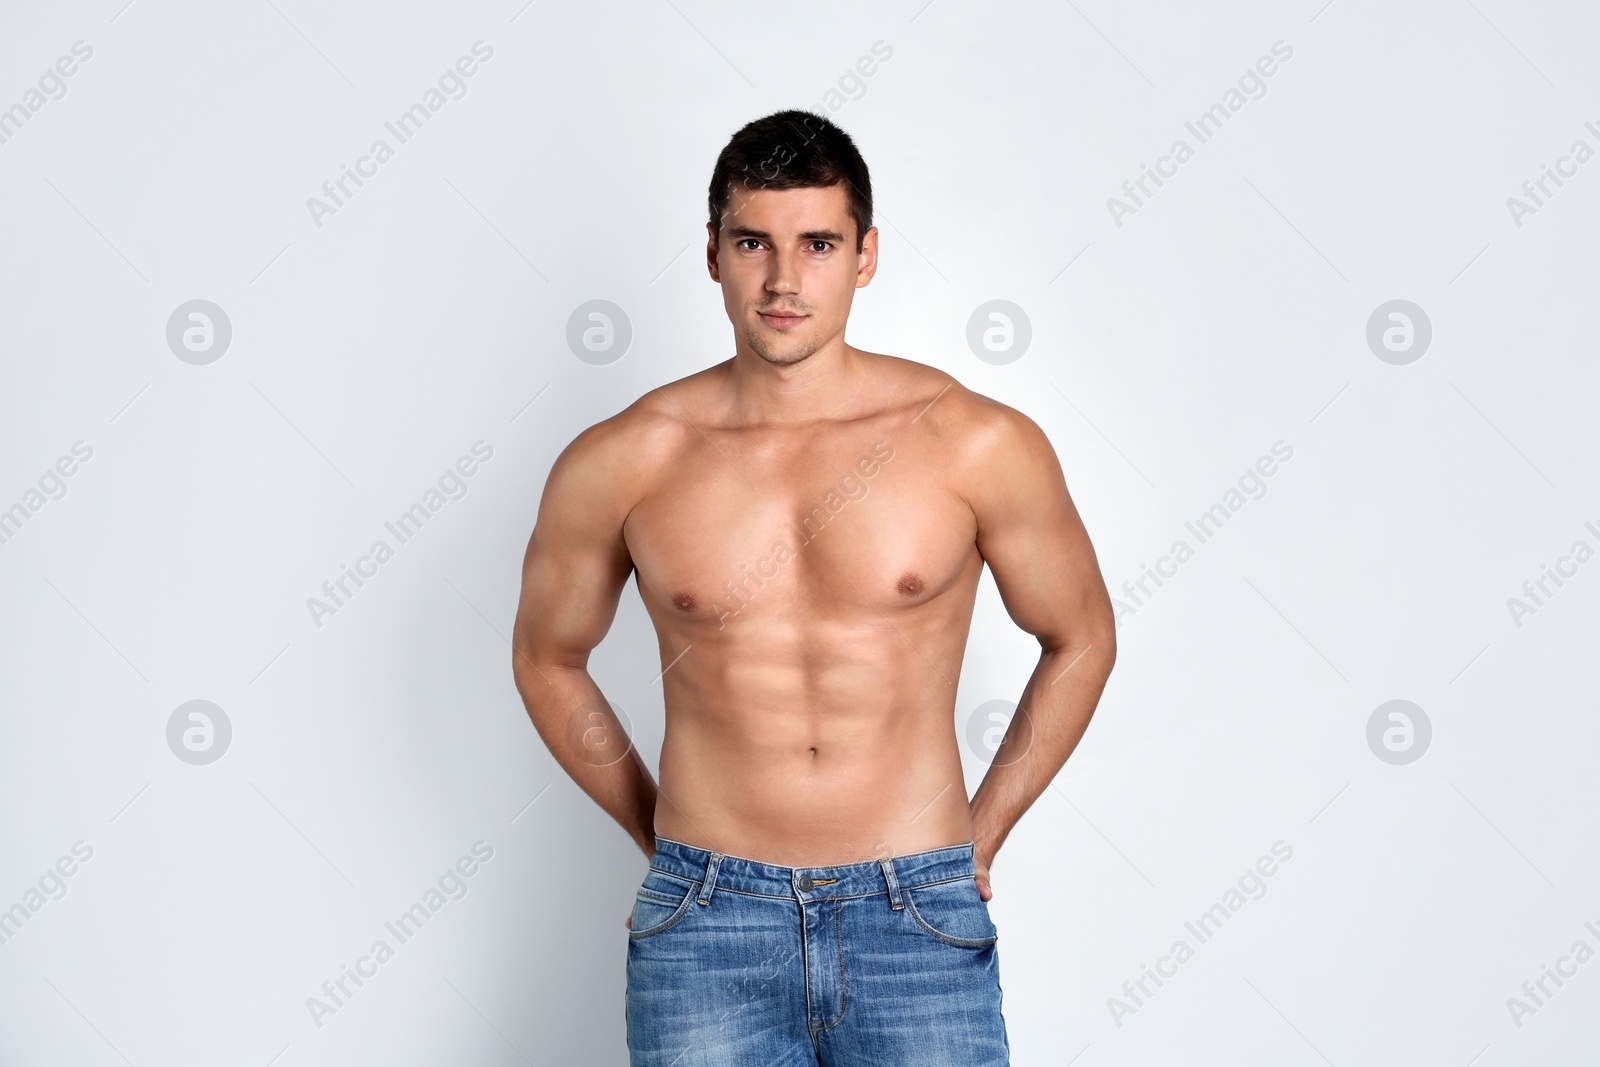 Photo of Man with sexy body on light background